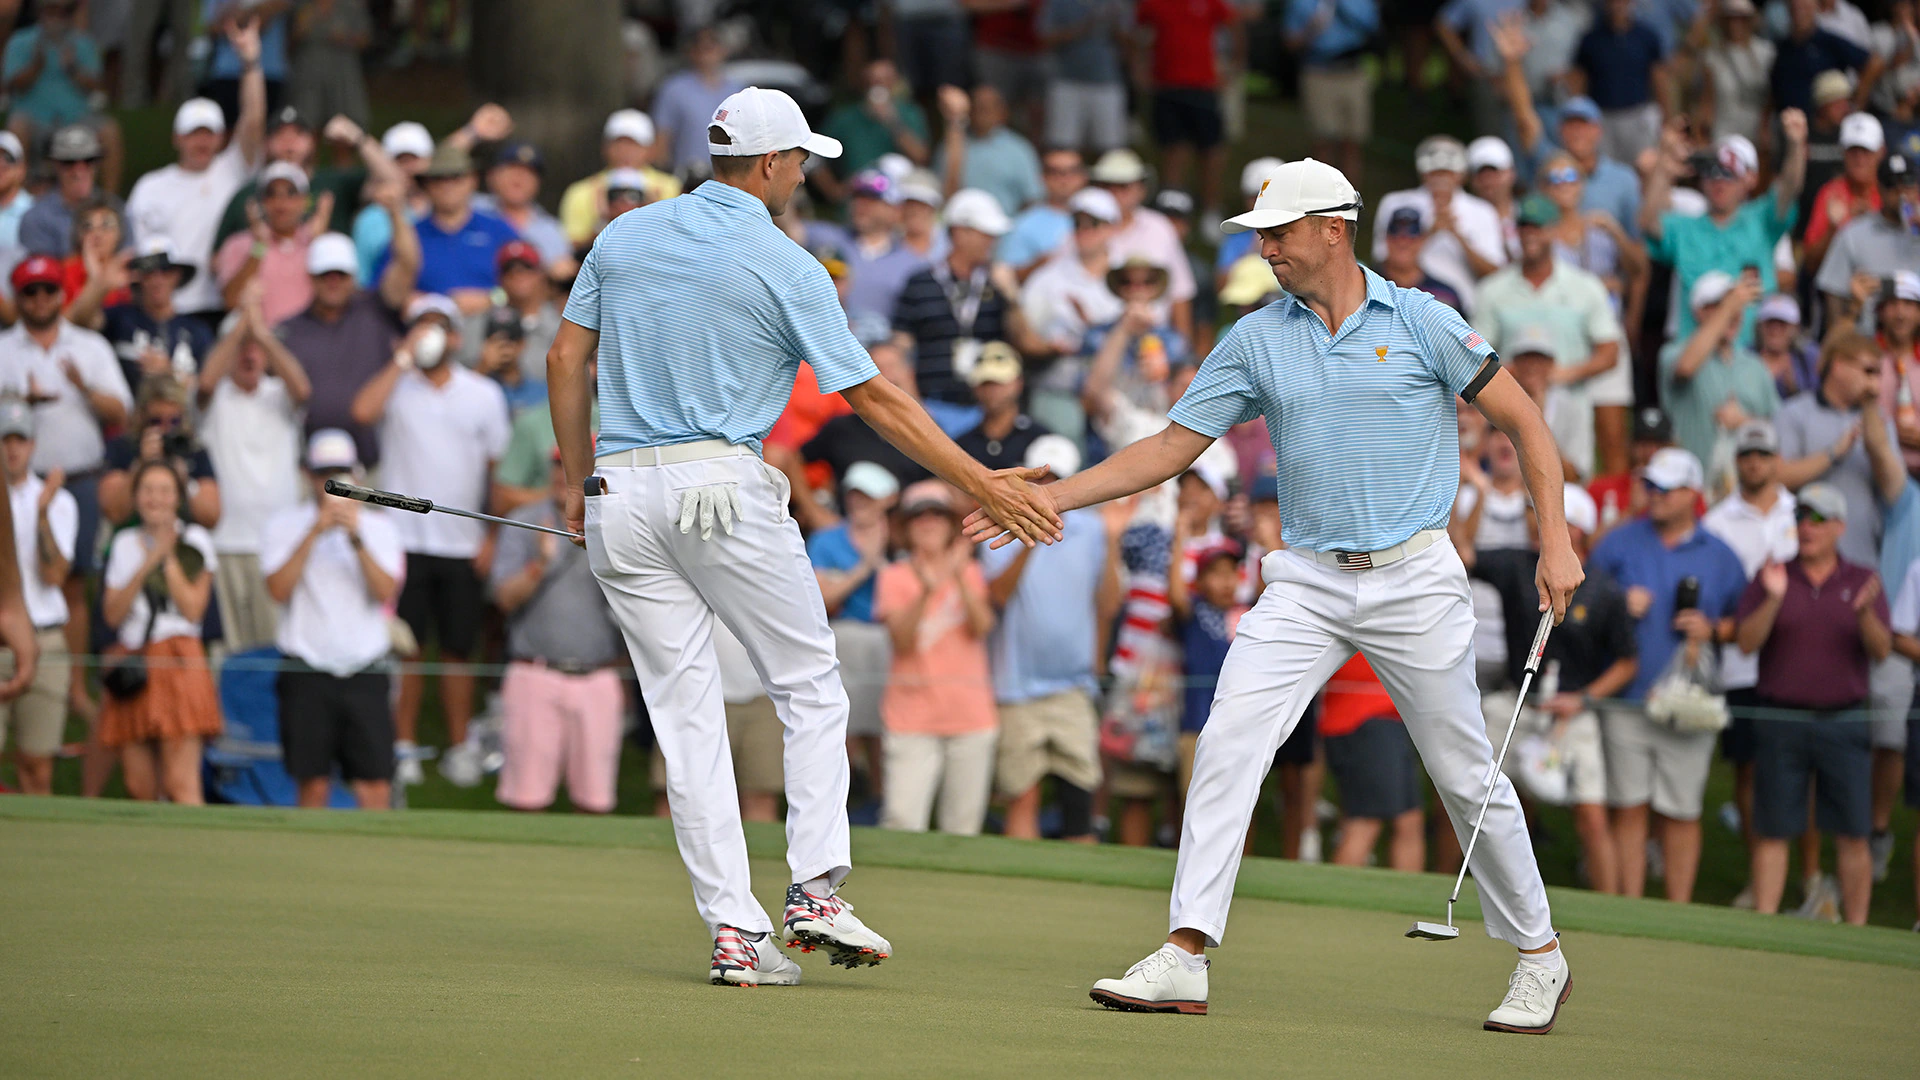 Golf Central Podcast: Breaking down U.S. dominance on Day 1 at Quail Hollow